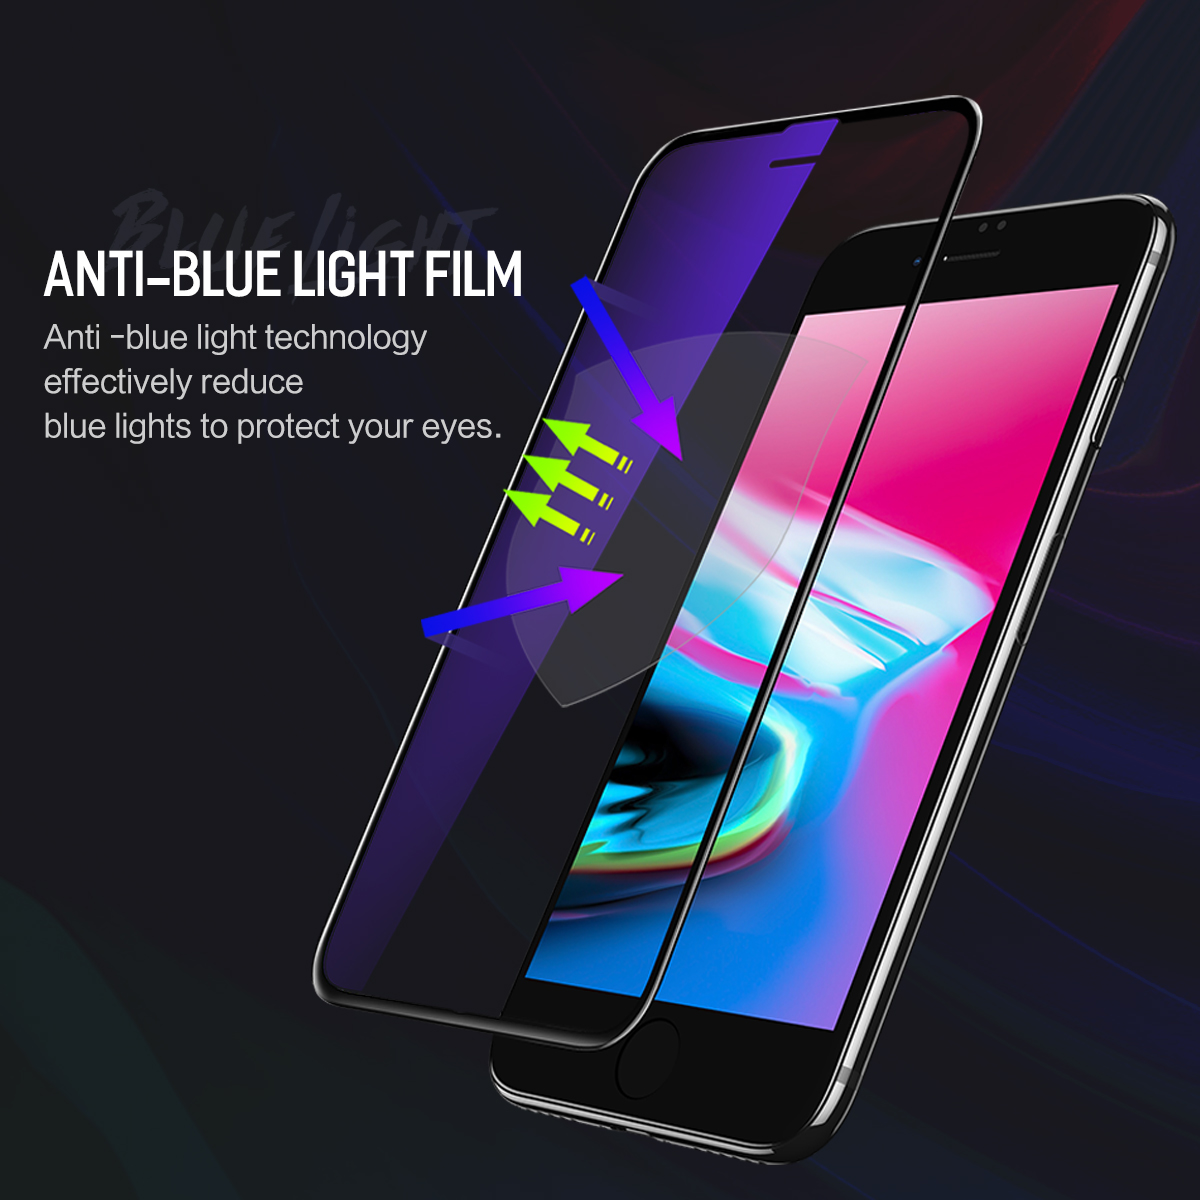 Rock-Tempered-Glass-Screen-Protector-For-iPhone-876s6-023mm-Anti-Blue-Light-Dustproof-Film-1291997-5